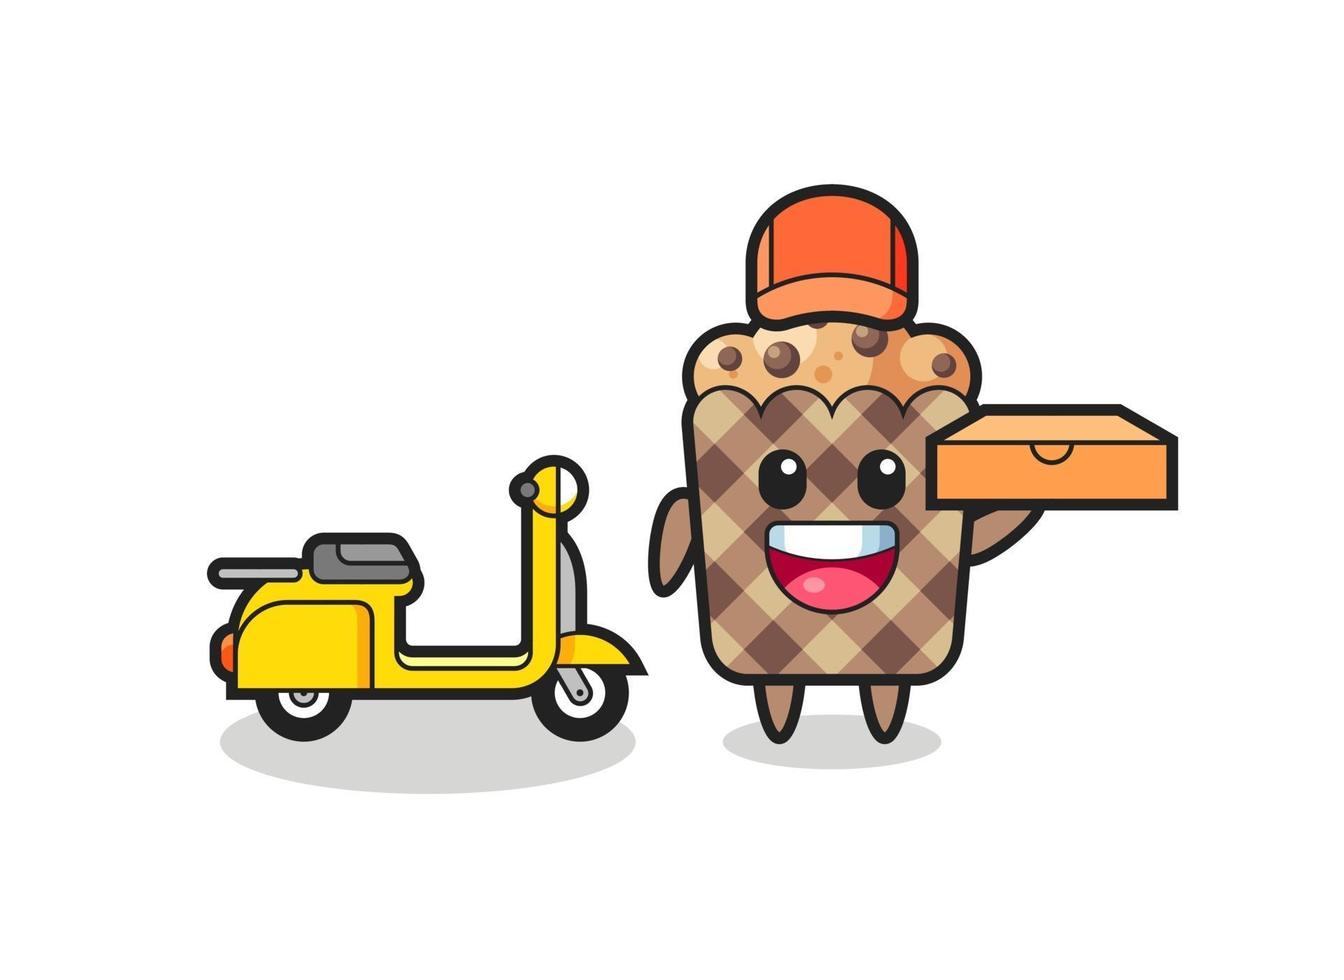 Character Illustration of muffin as a pizza deliveryman vector